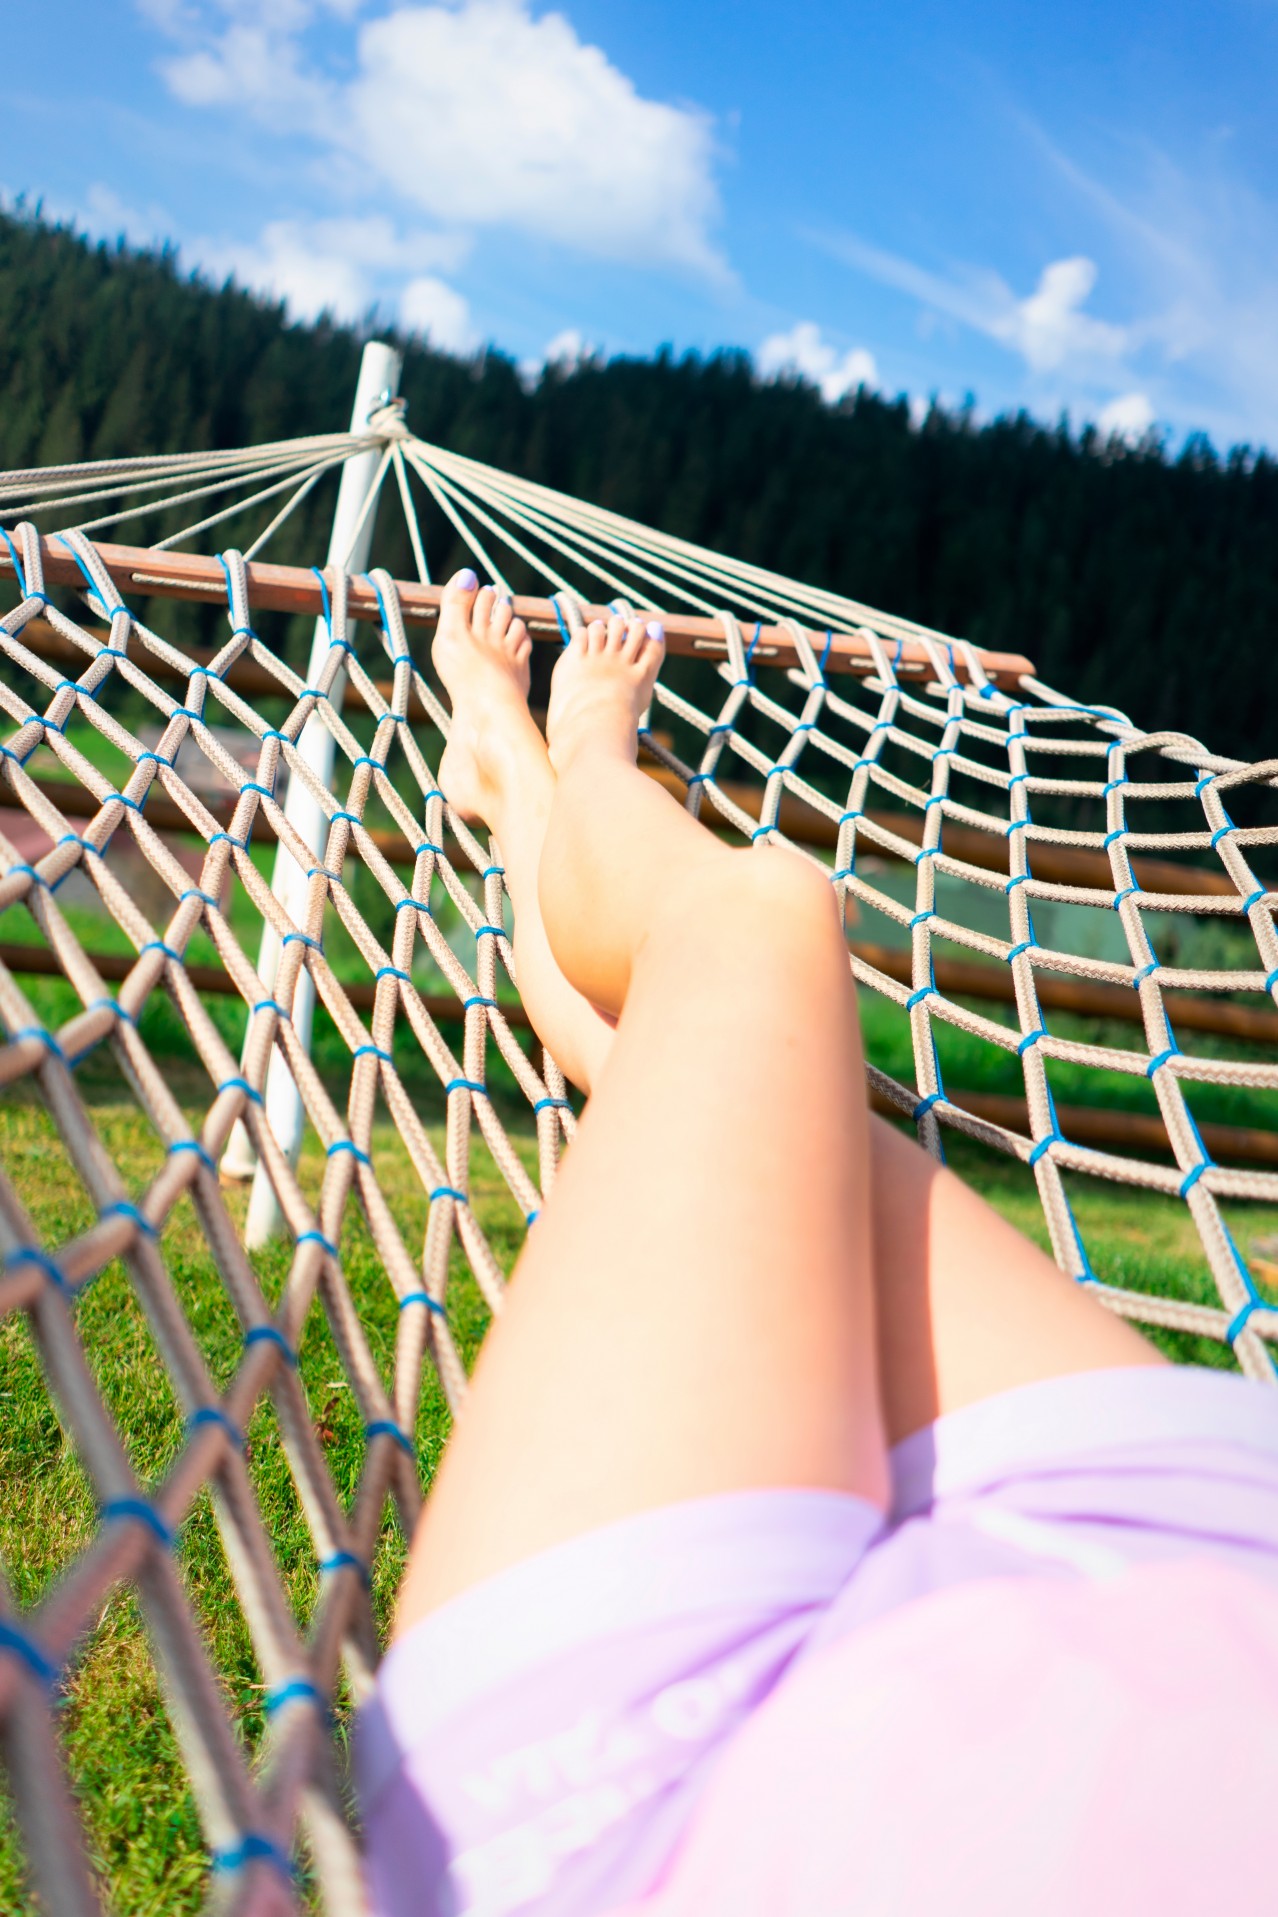 Barefooted woman chilling in hammock outdoors